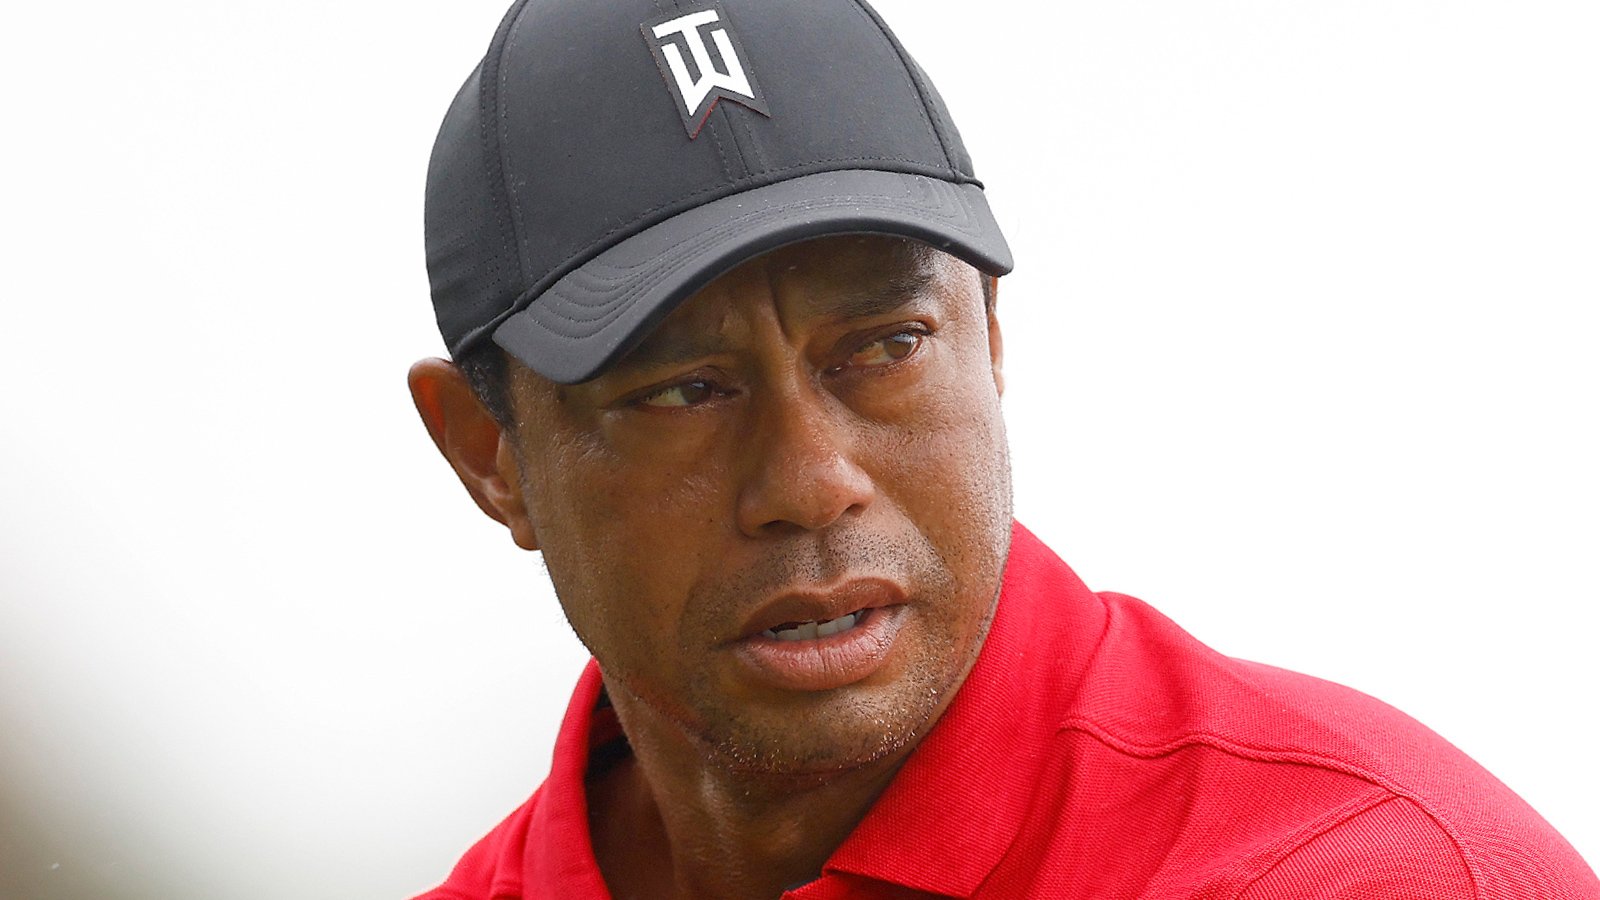 Tiger Woods doping controversy, plus more sports hot takes - cover